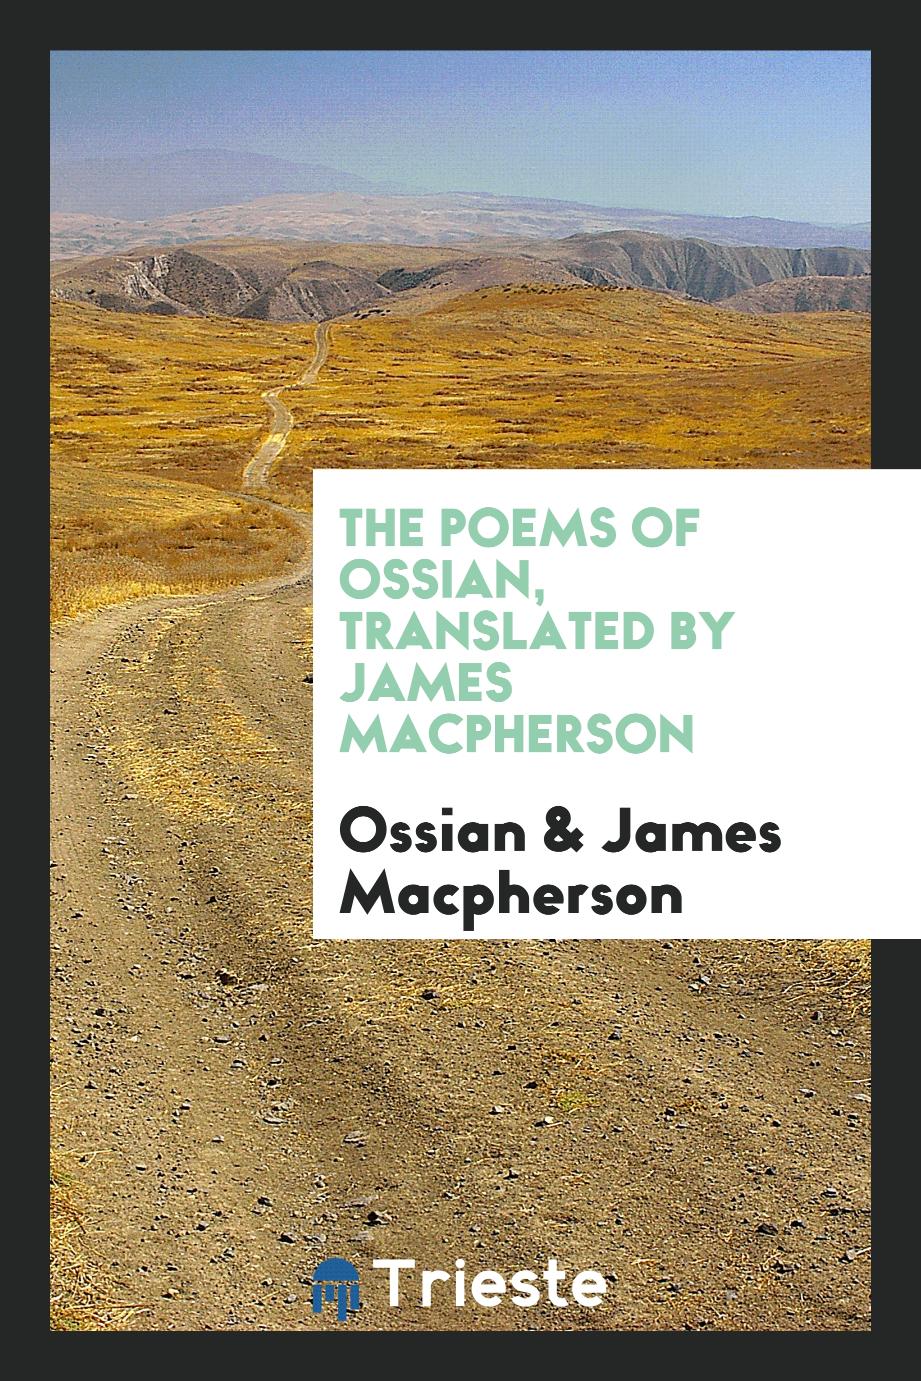 The Poems of Ossian, Translated by James Macpherson